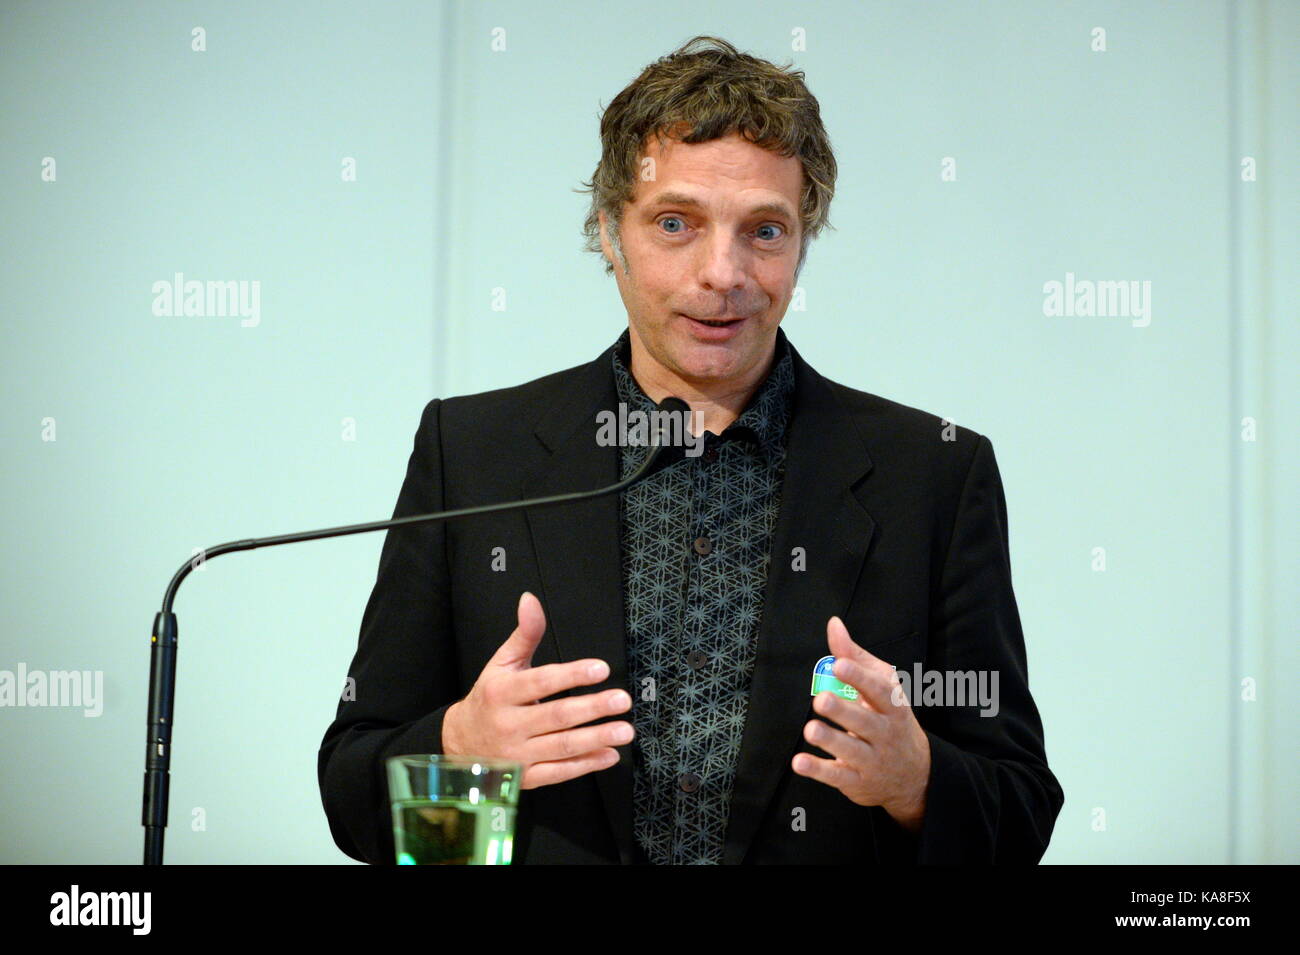 Vienna, Austria. 26th Sep, 2017. Press conference with  environmental chemist Helmut Burtscher-Schaden from Global 2000 on current environmental policy issues. Credit: Franz Perc/Alamy Live News Stock Photo